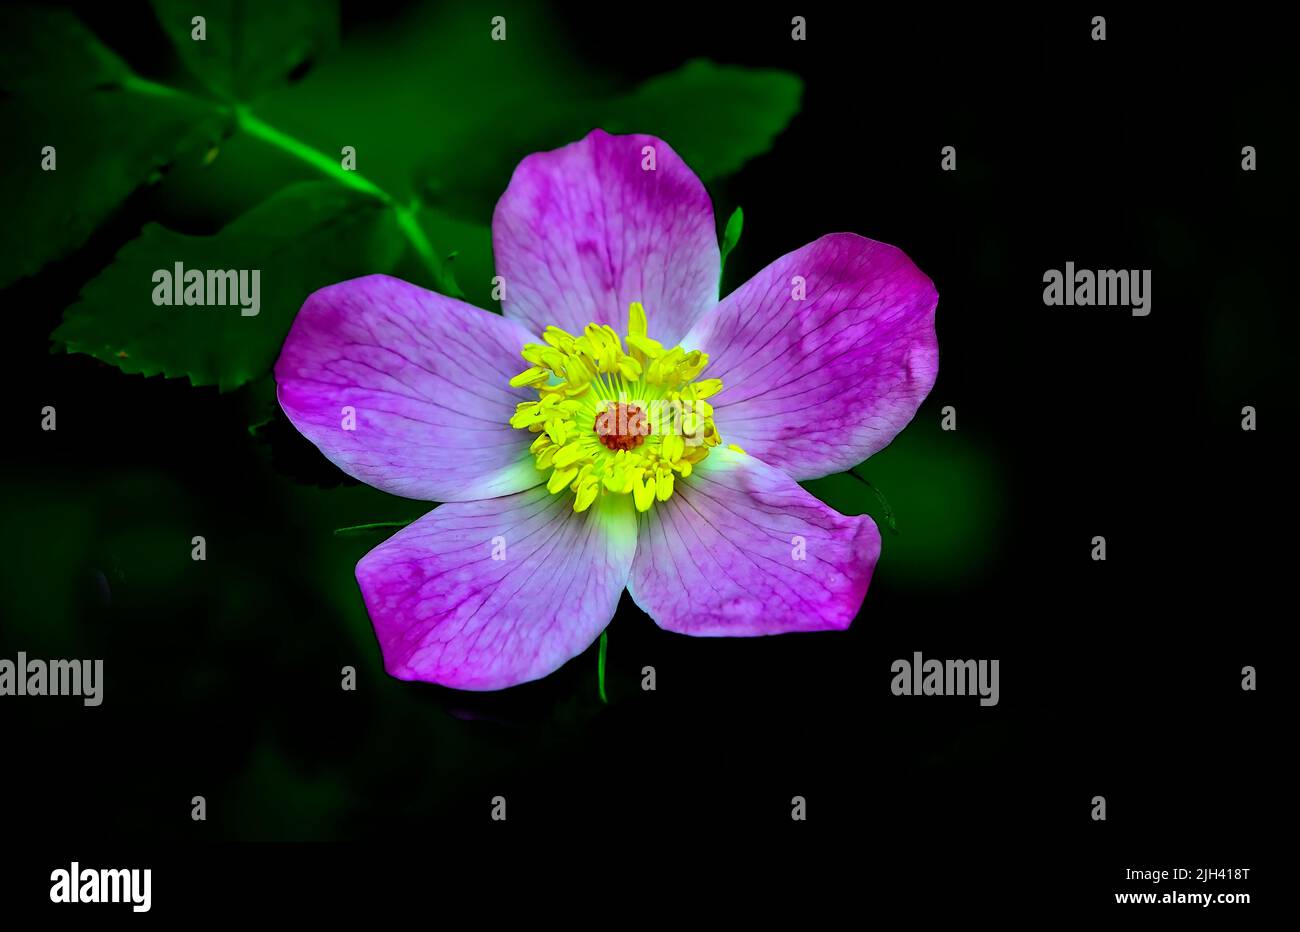 A colorful wild rose (Rosa acicularis); on a dark background in rural Alberta Canada Stock Photo